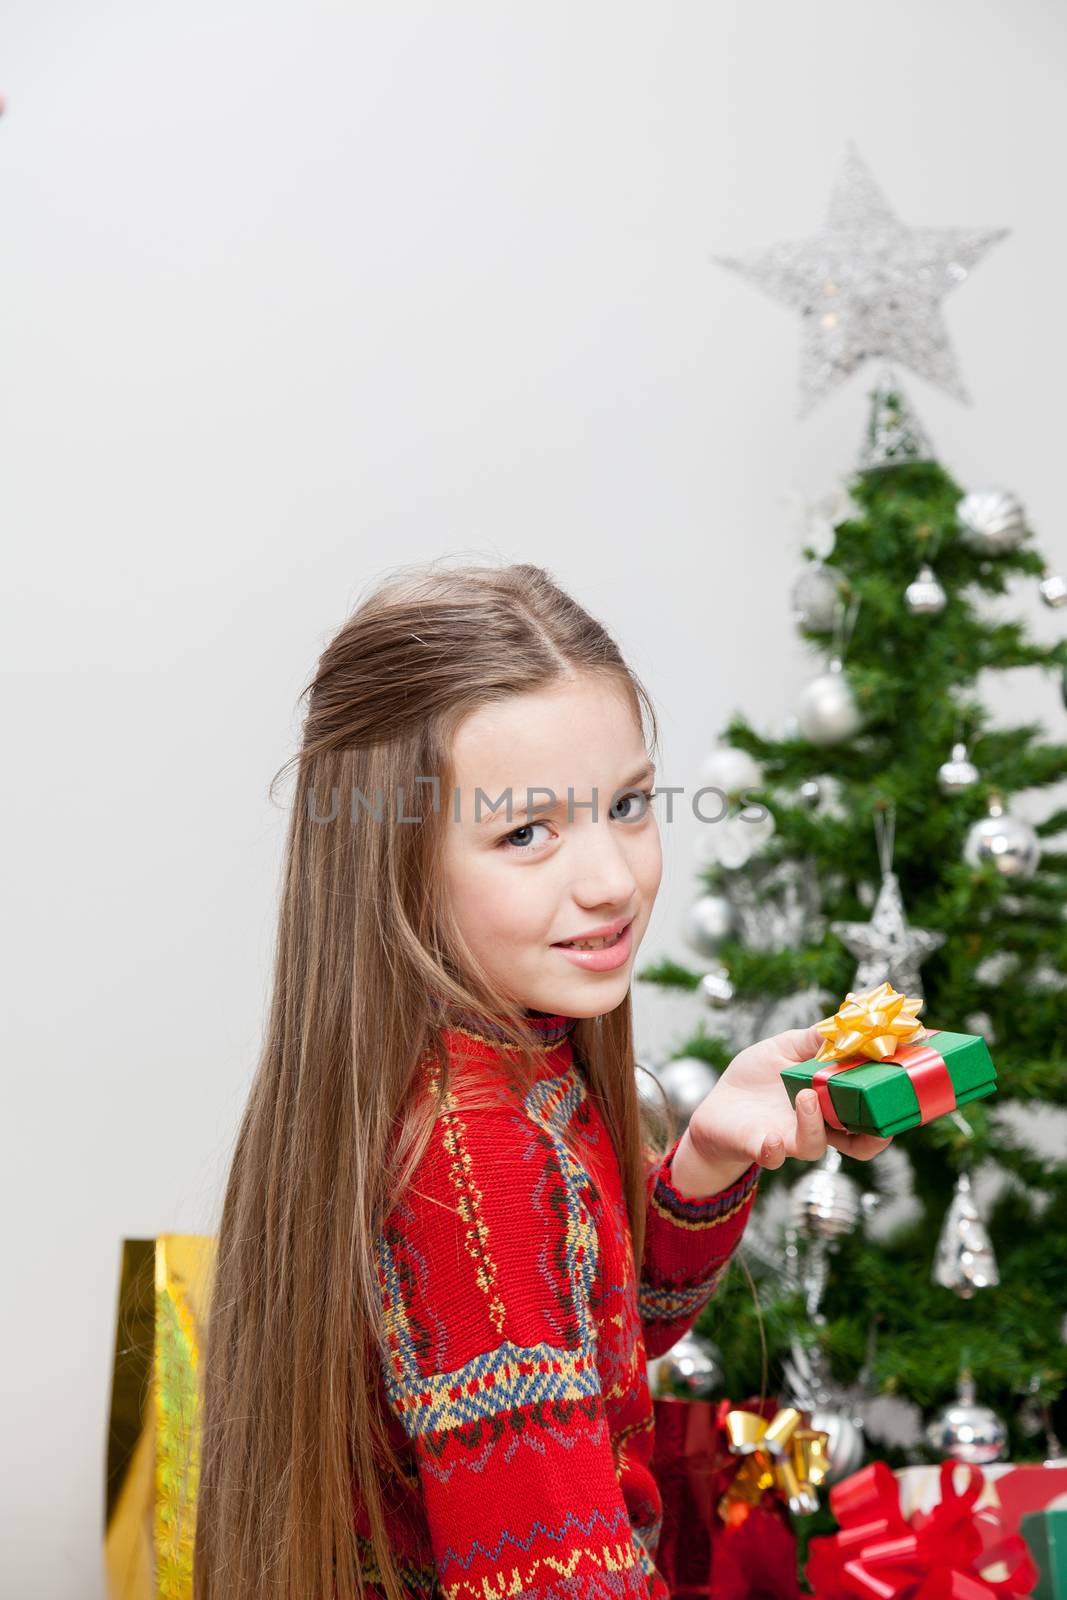 8-10, apartment, background, beautiful, box, camera, caucasian, celebration, christmas, colorful, cute, decoration, festive, gift, gifts, girl, girls, gold, golden, green, hanging, holiday, holidays, home, house, leisure, little, look, looking, merry, model, new, old, one, ornament, person, pine, present, presents, property, red, releases, ribbon, santa, star, time, tree, vertical, white, winter, xmas, year, years